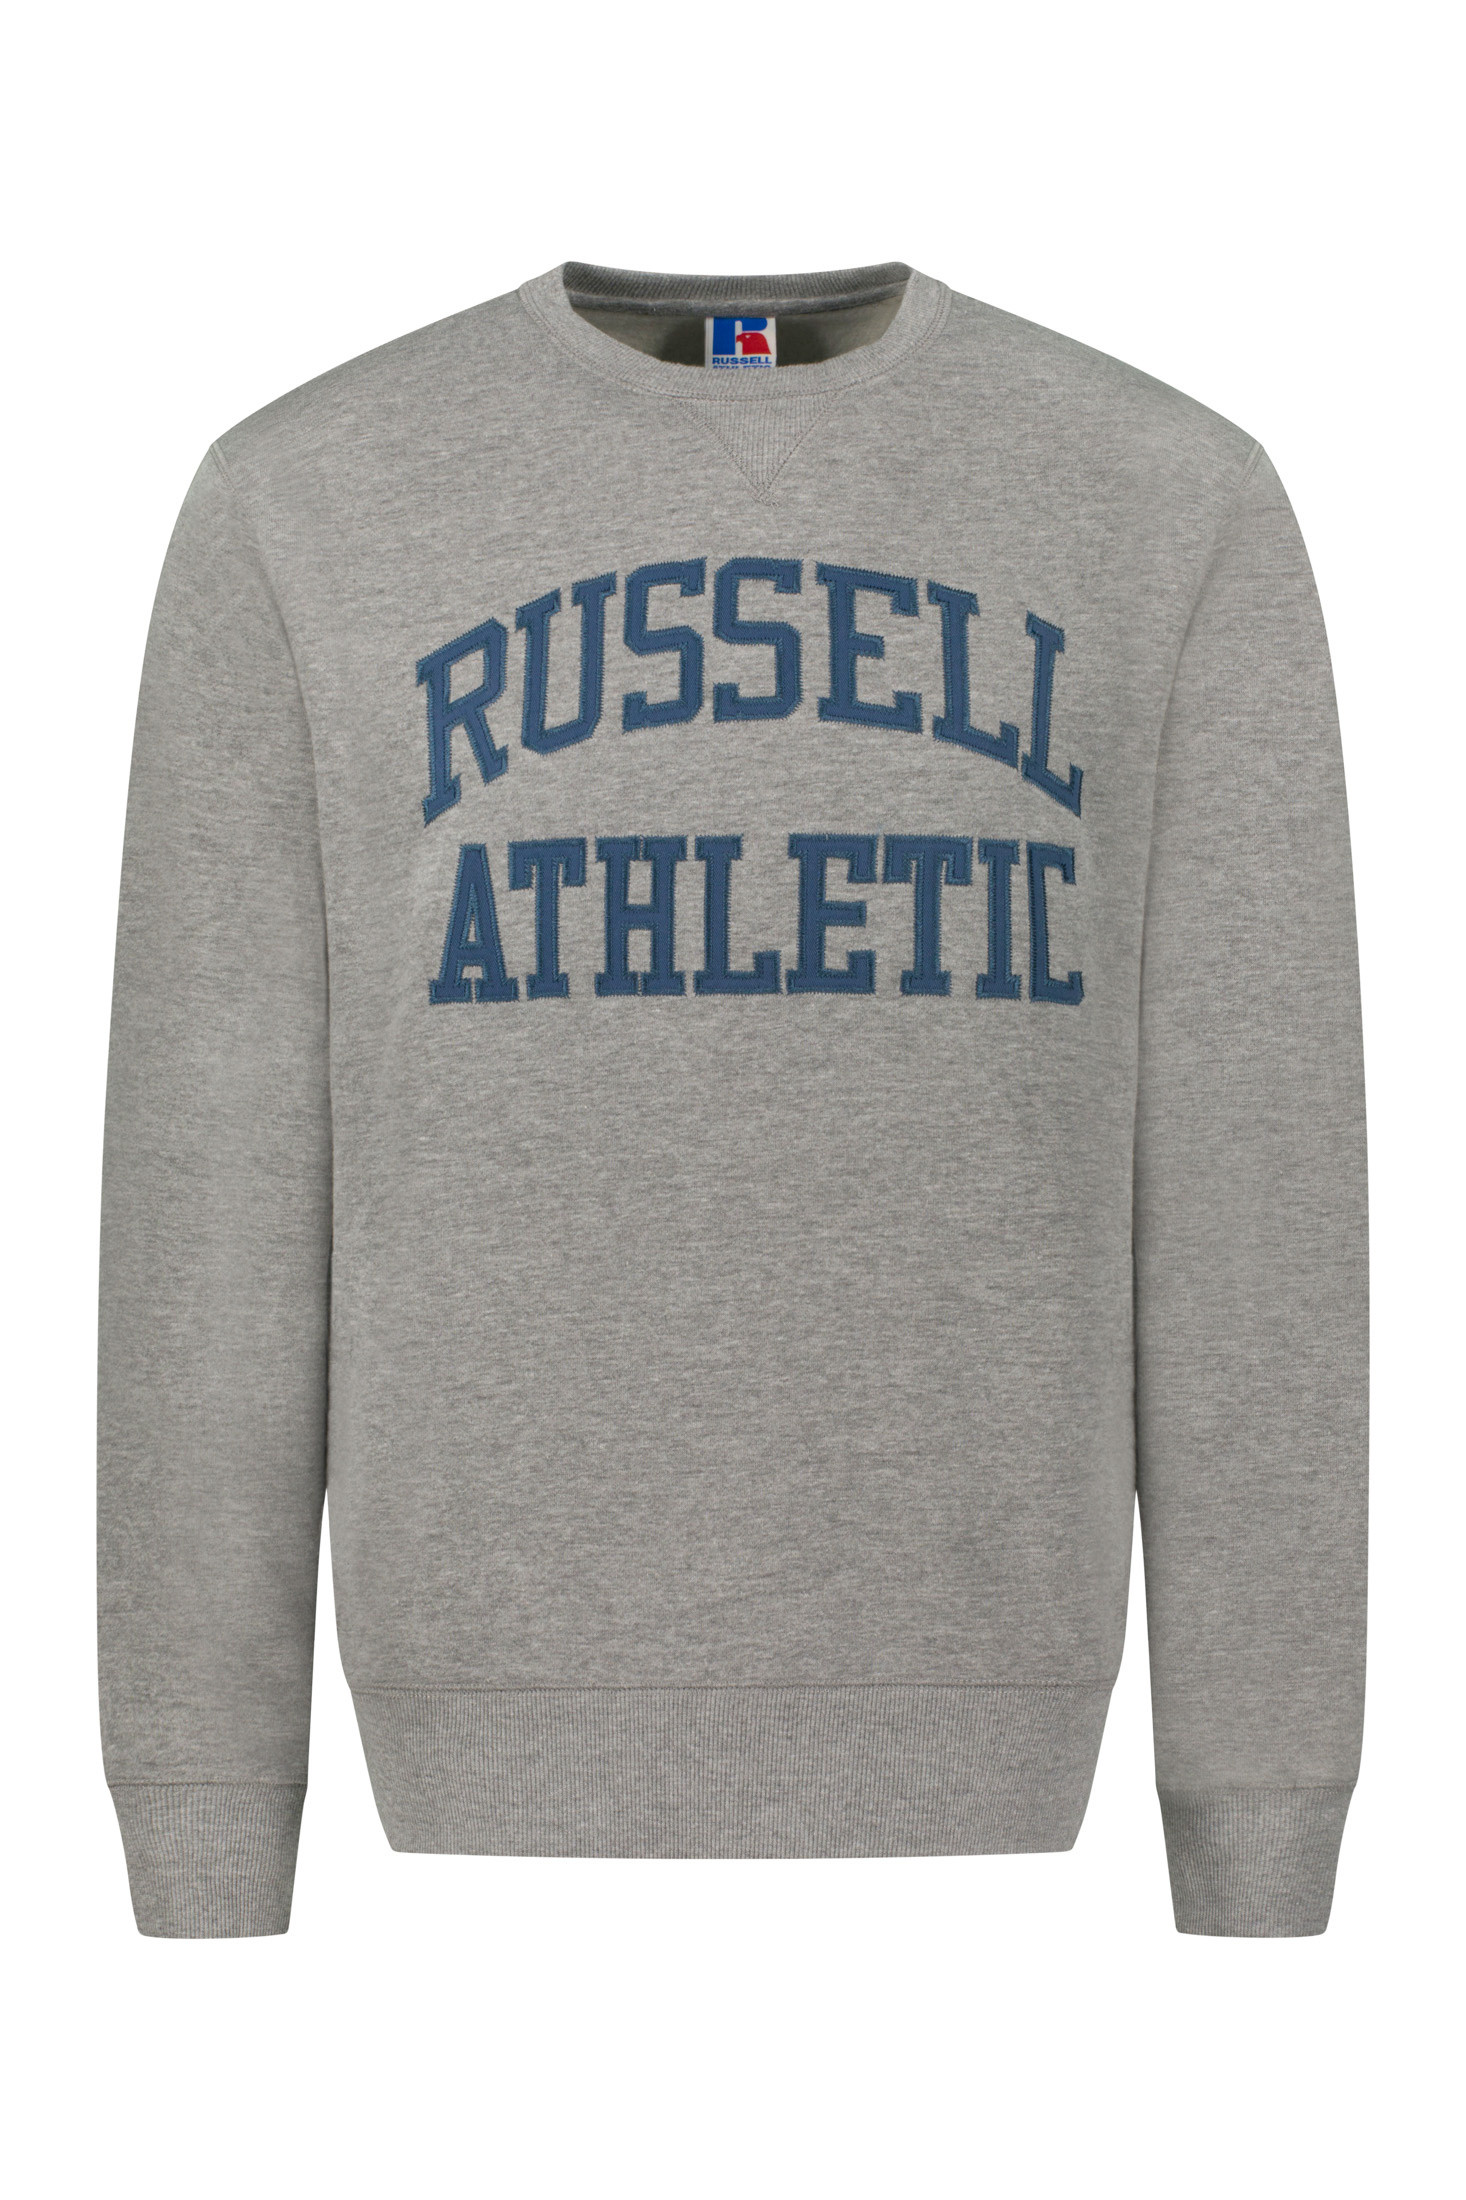 Russell Athletic - Sweatshirt with embroidery, Light Grey, large image number 0